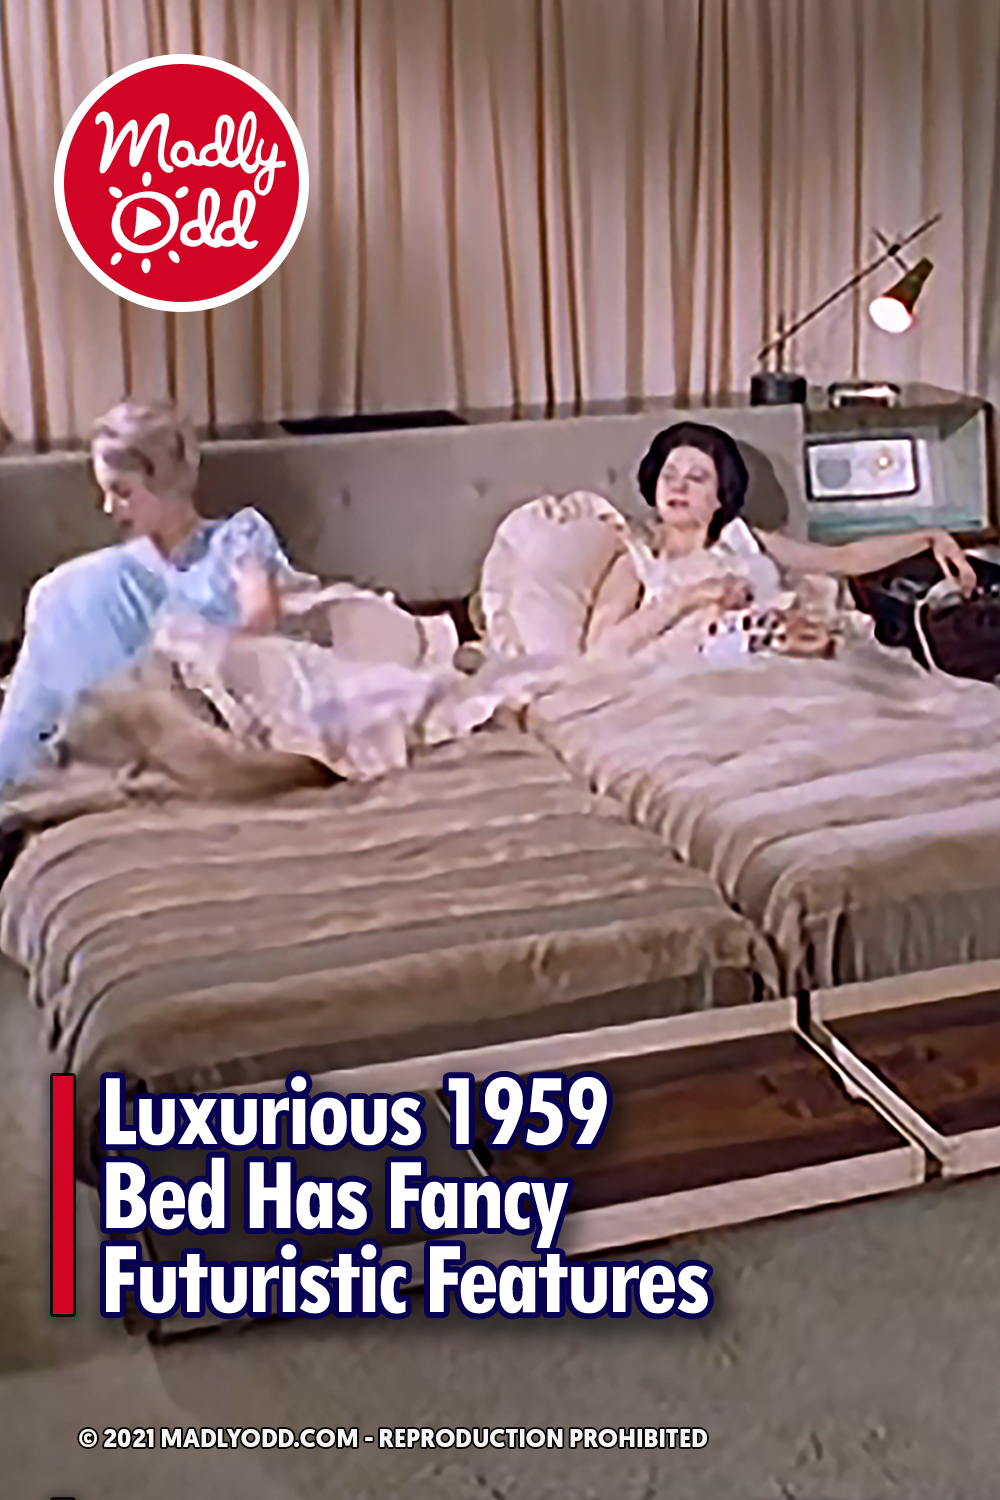 Luxurious 1959 Bed Has Fancy Futuristic Features